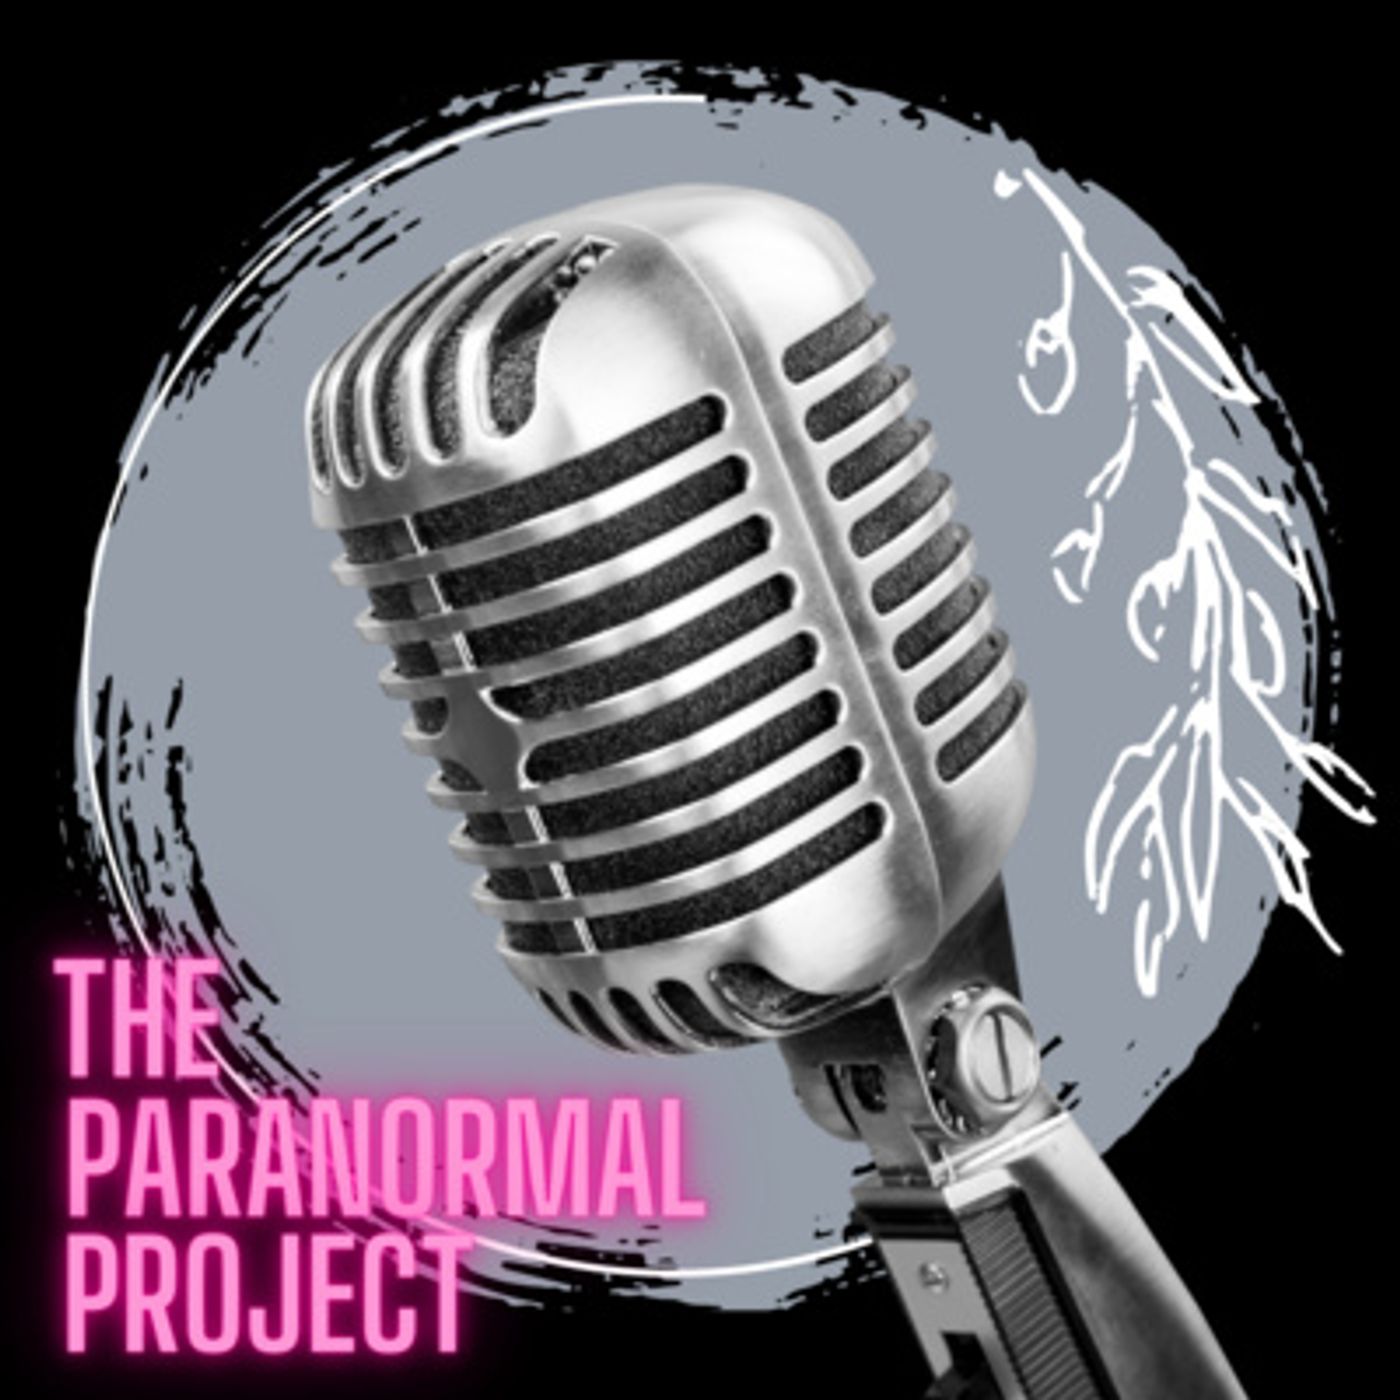 Trailer: The Paranormal Project